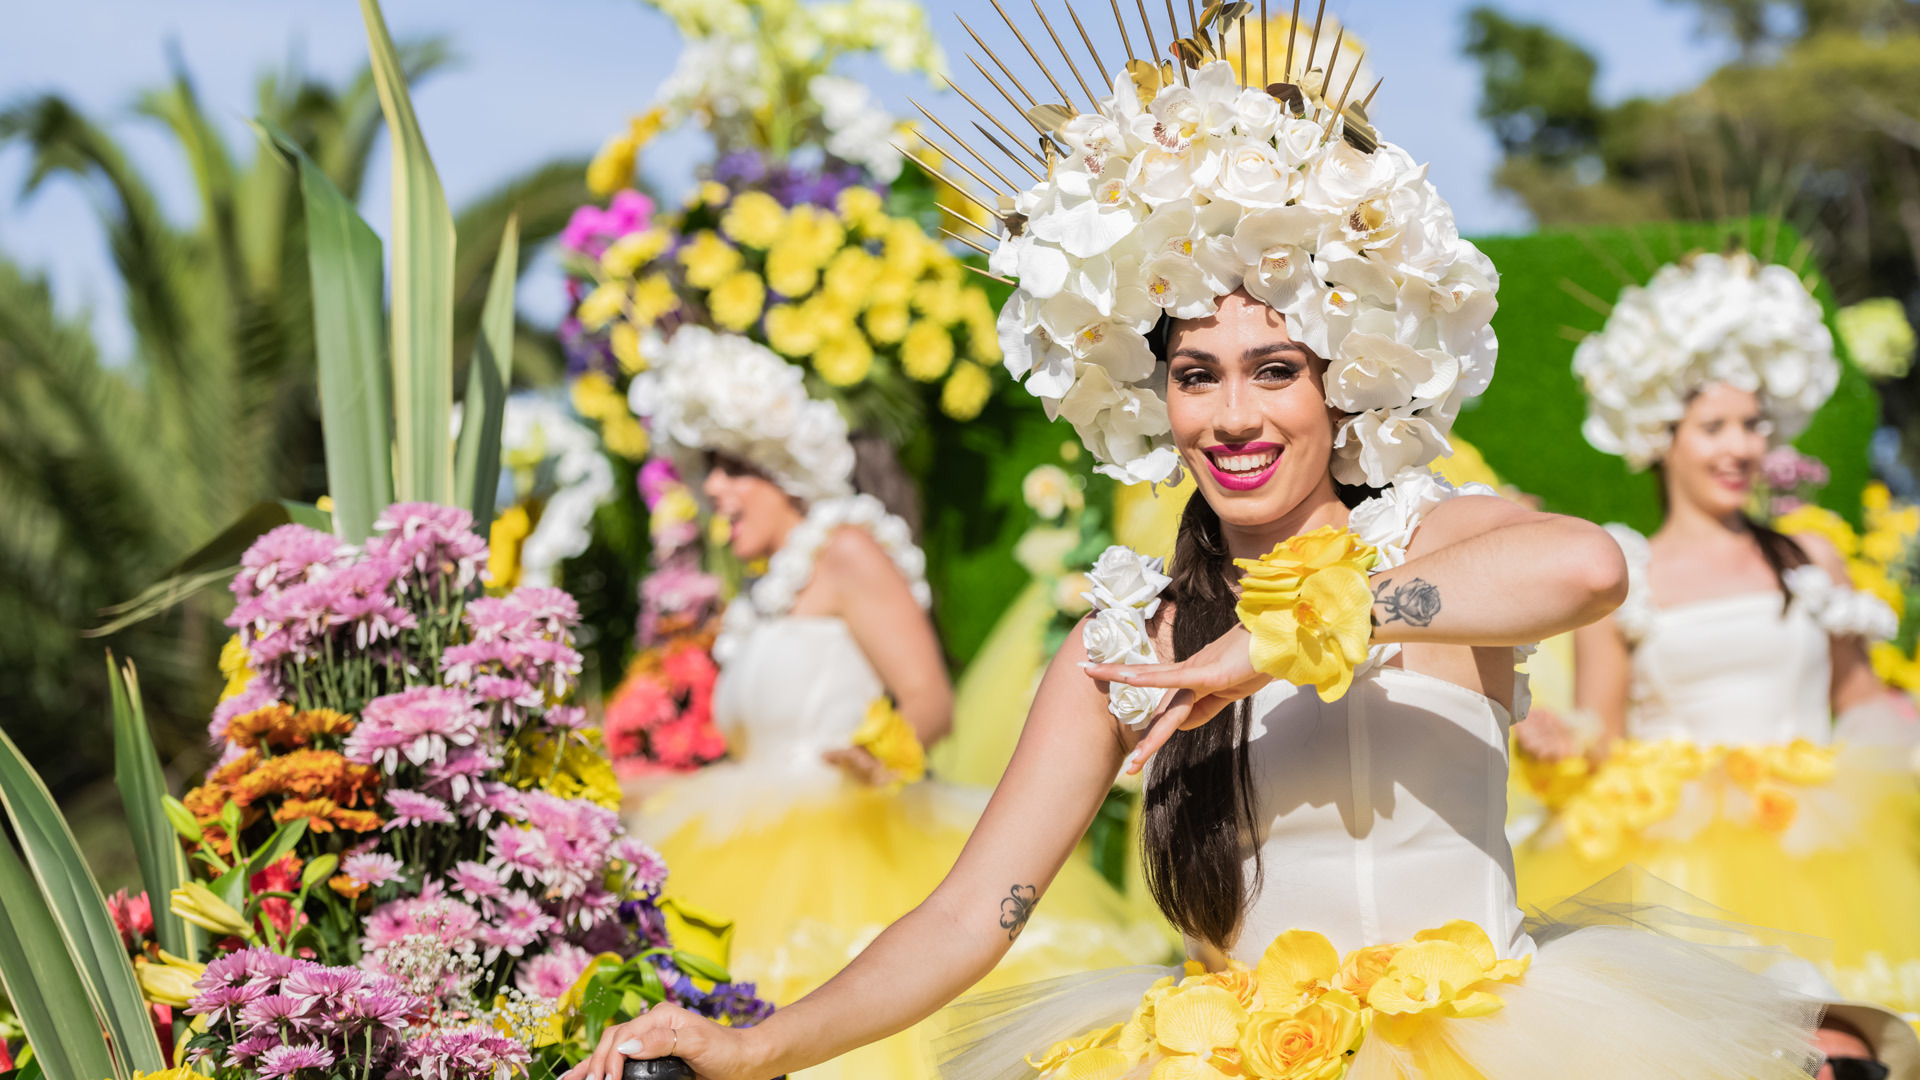 The Flowers Festival in Madeira image